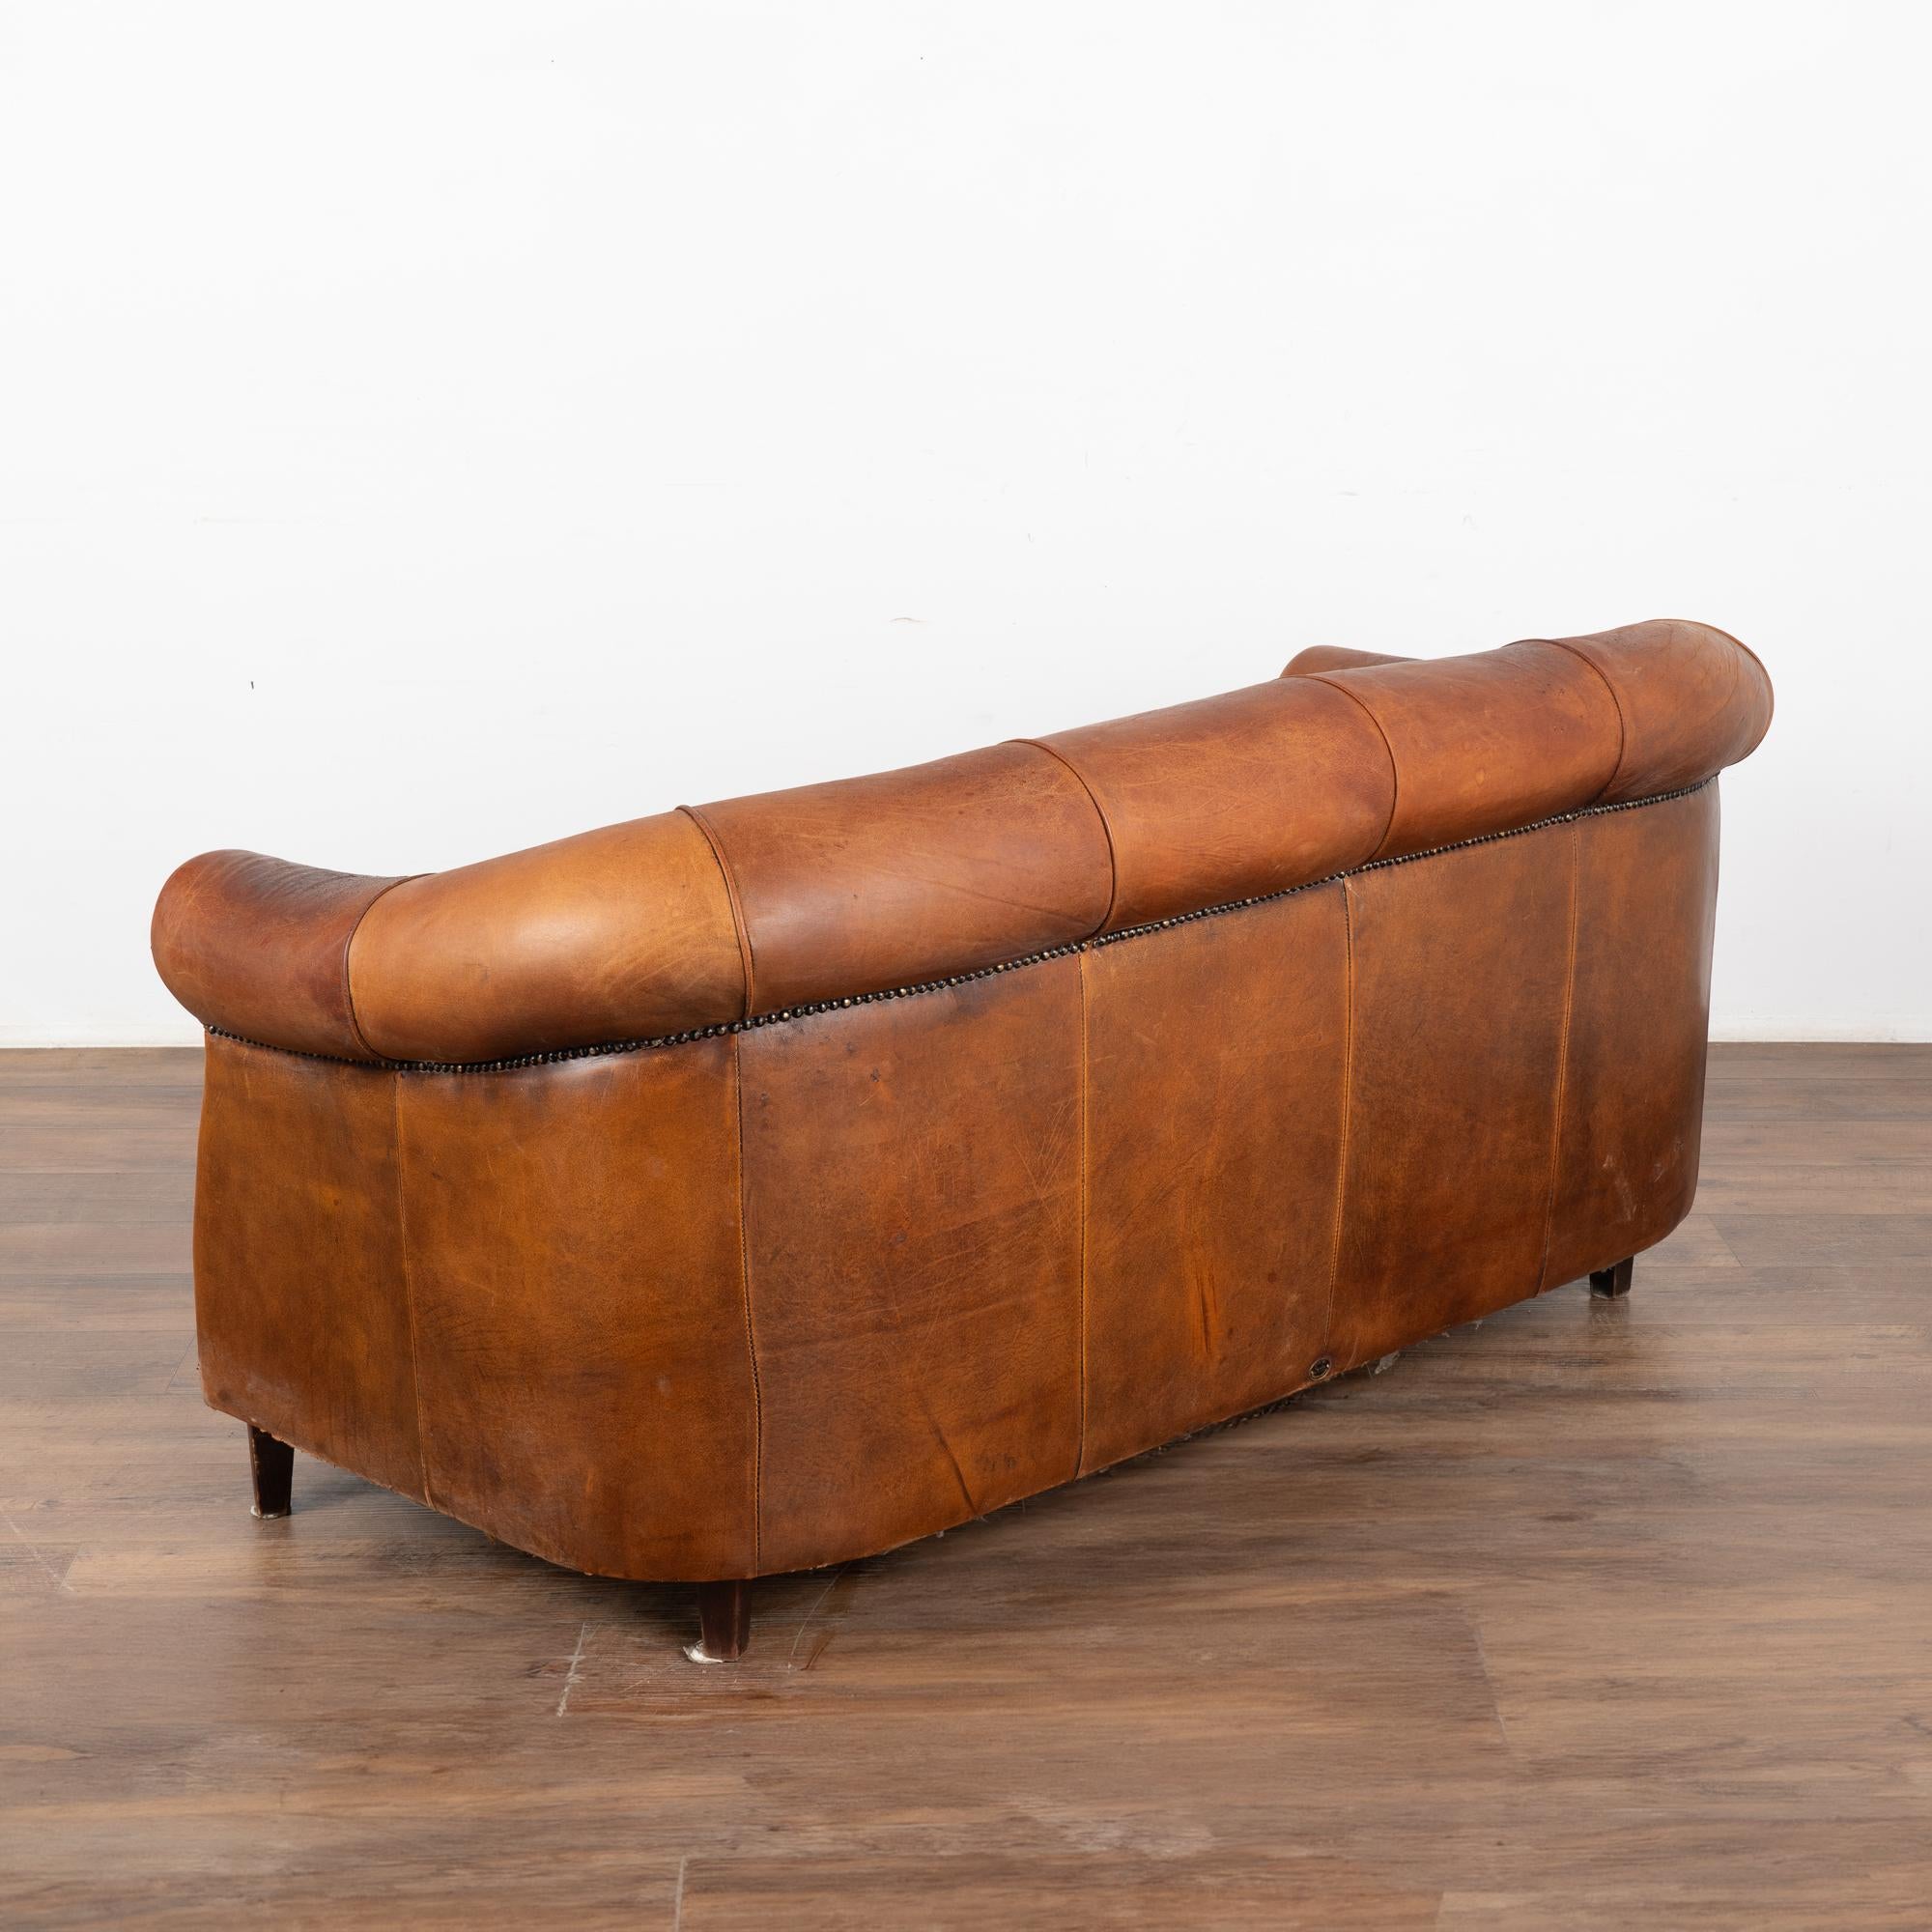 Vintage Brown Leather Two Seat Sofa Loveseat, France circa 1920-40 8